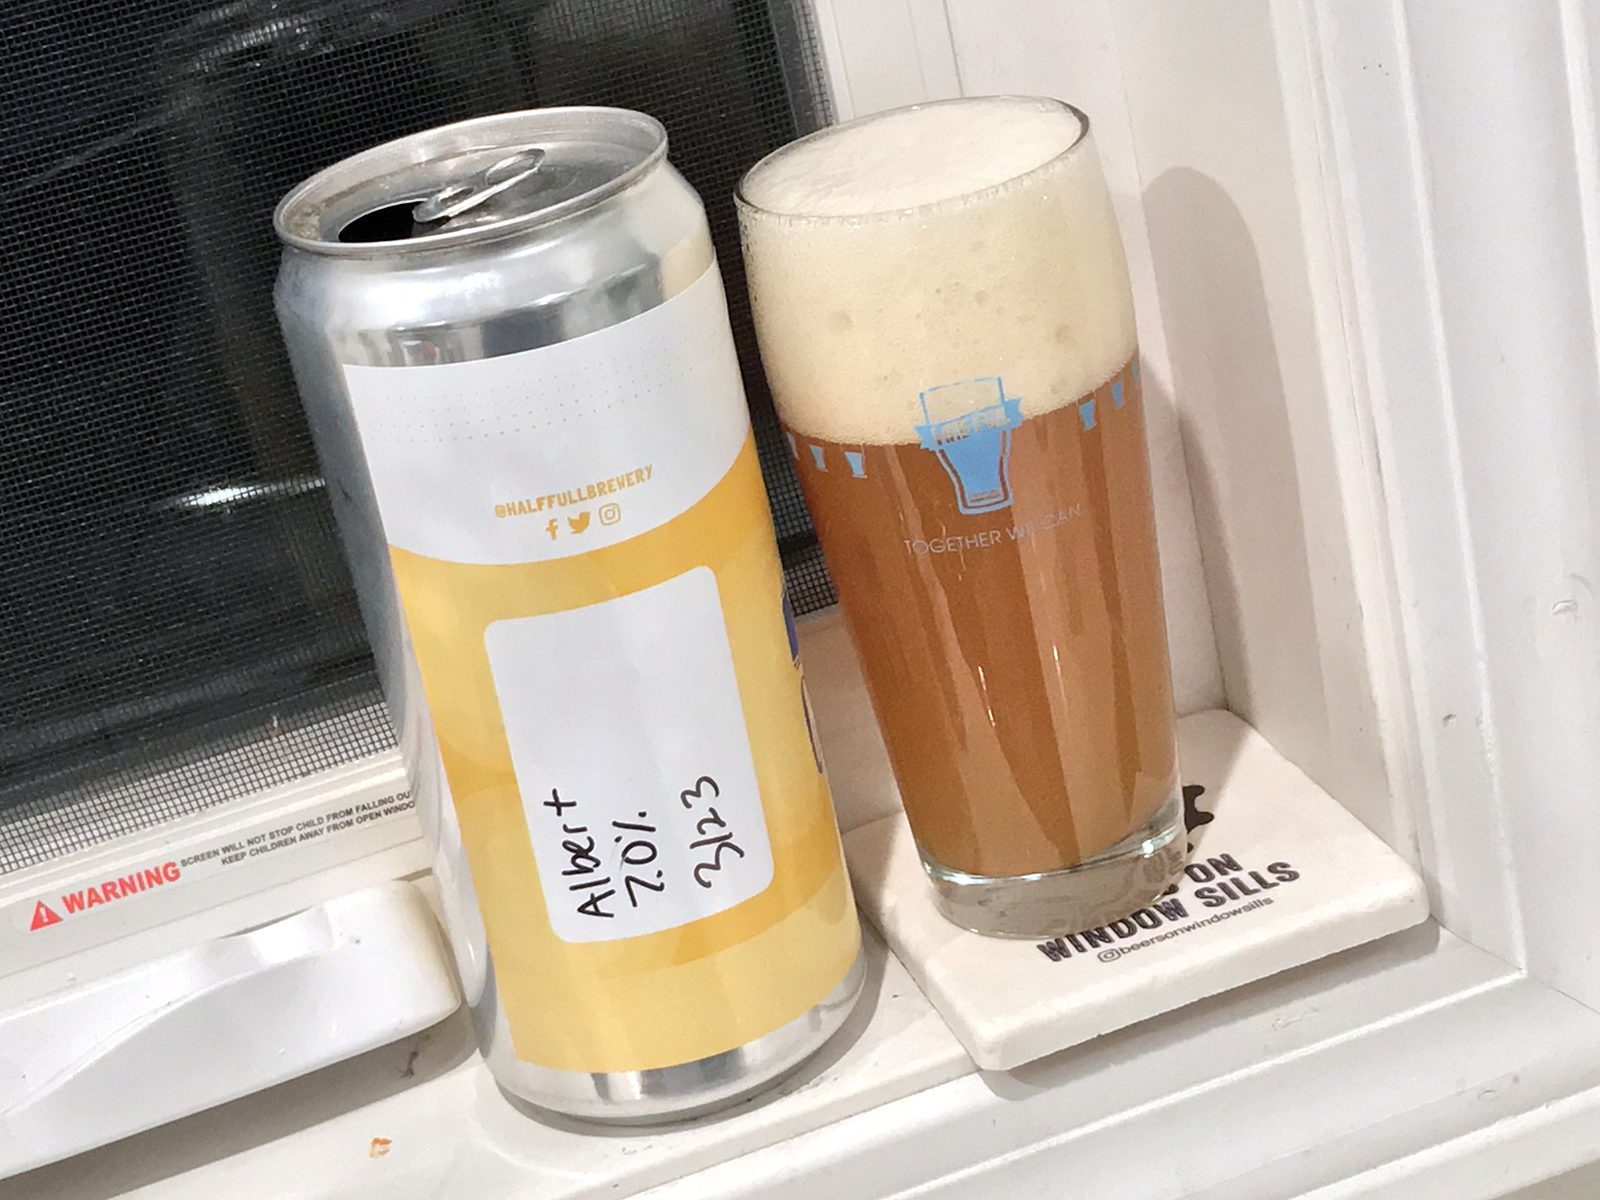 Half Full Brewery: Albert (Without Rhyme or Reason Release #5.5)